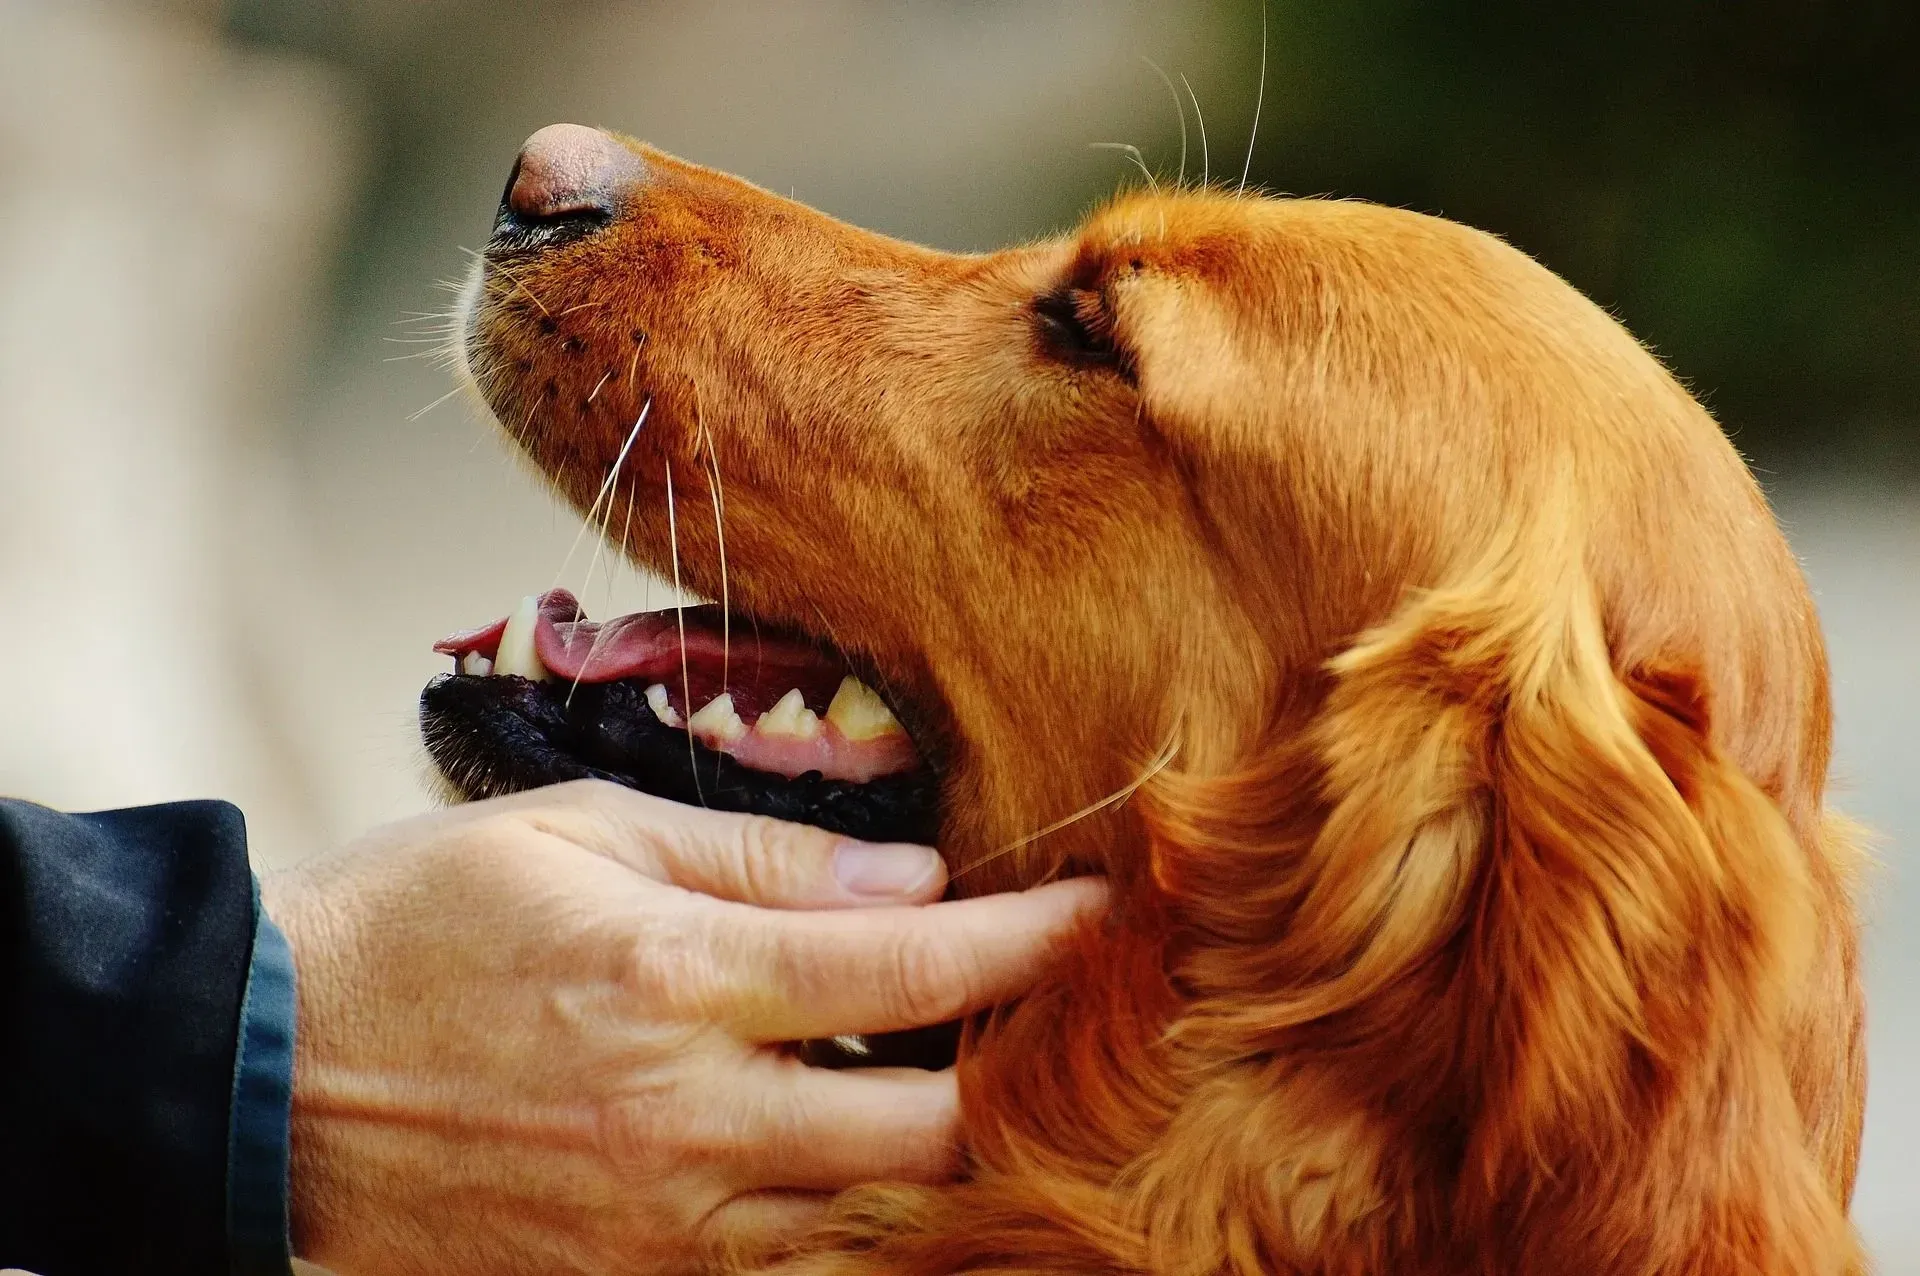 Irish Red Setter dog is looking at his human who is petting him